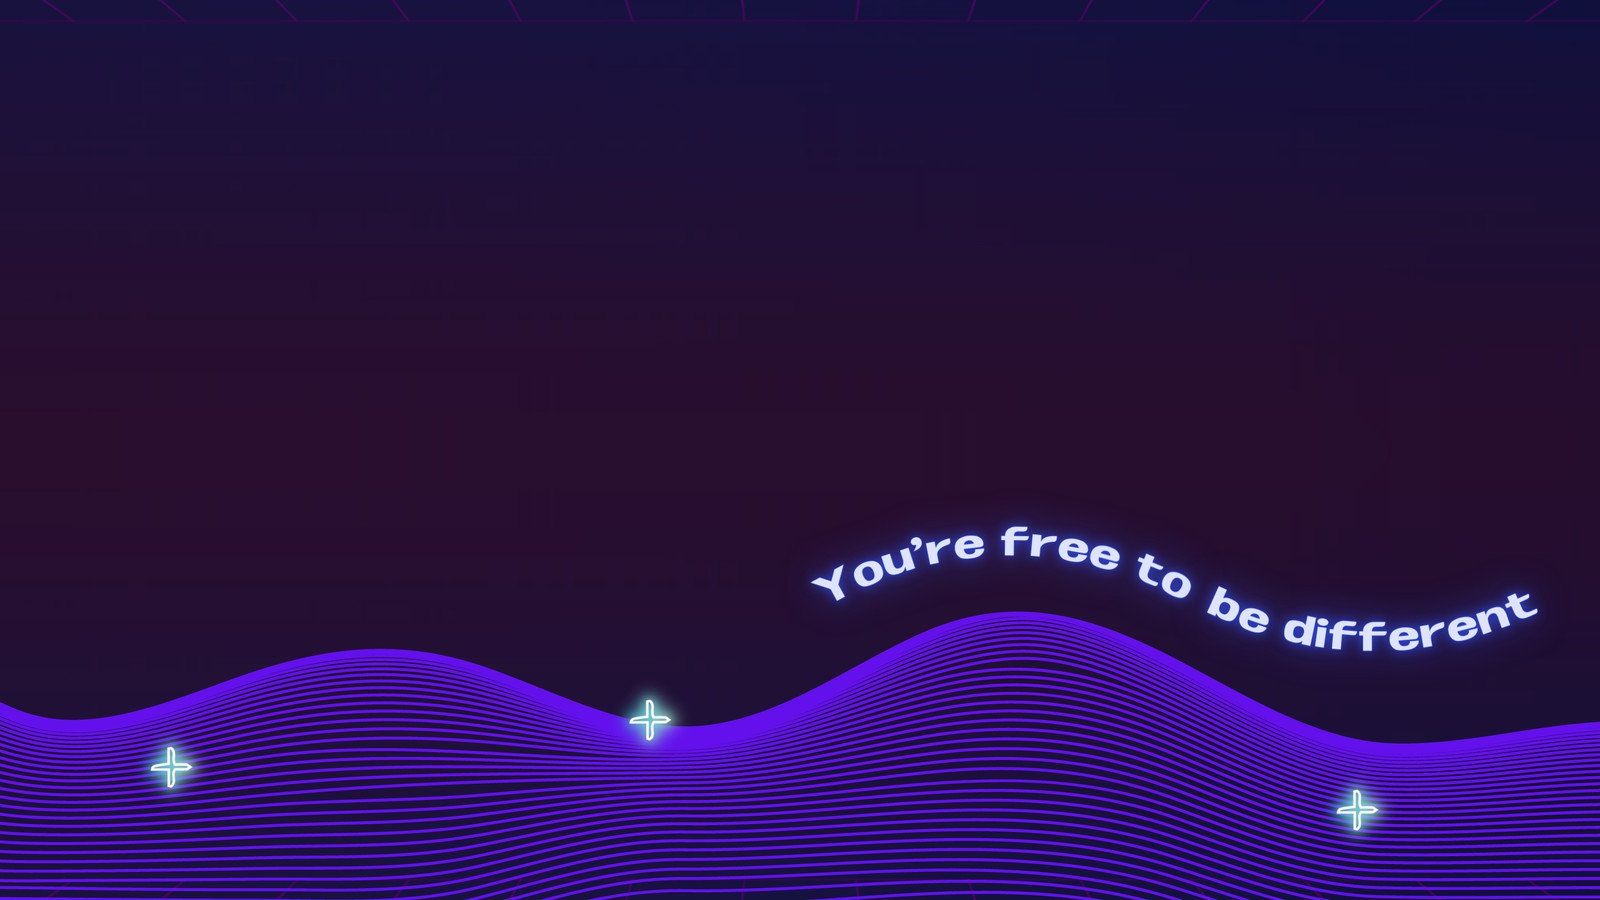 Purple and blue waves with the text 